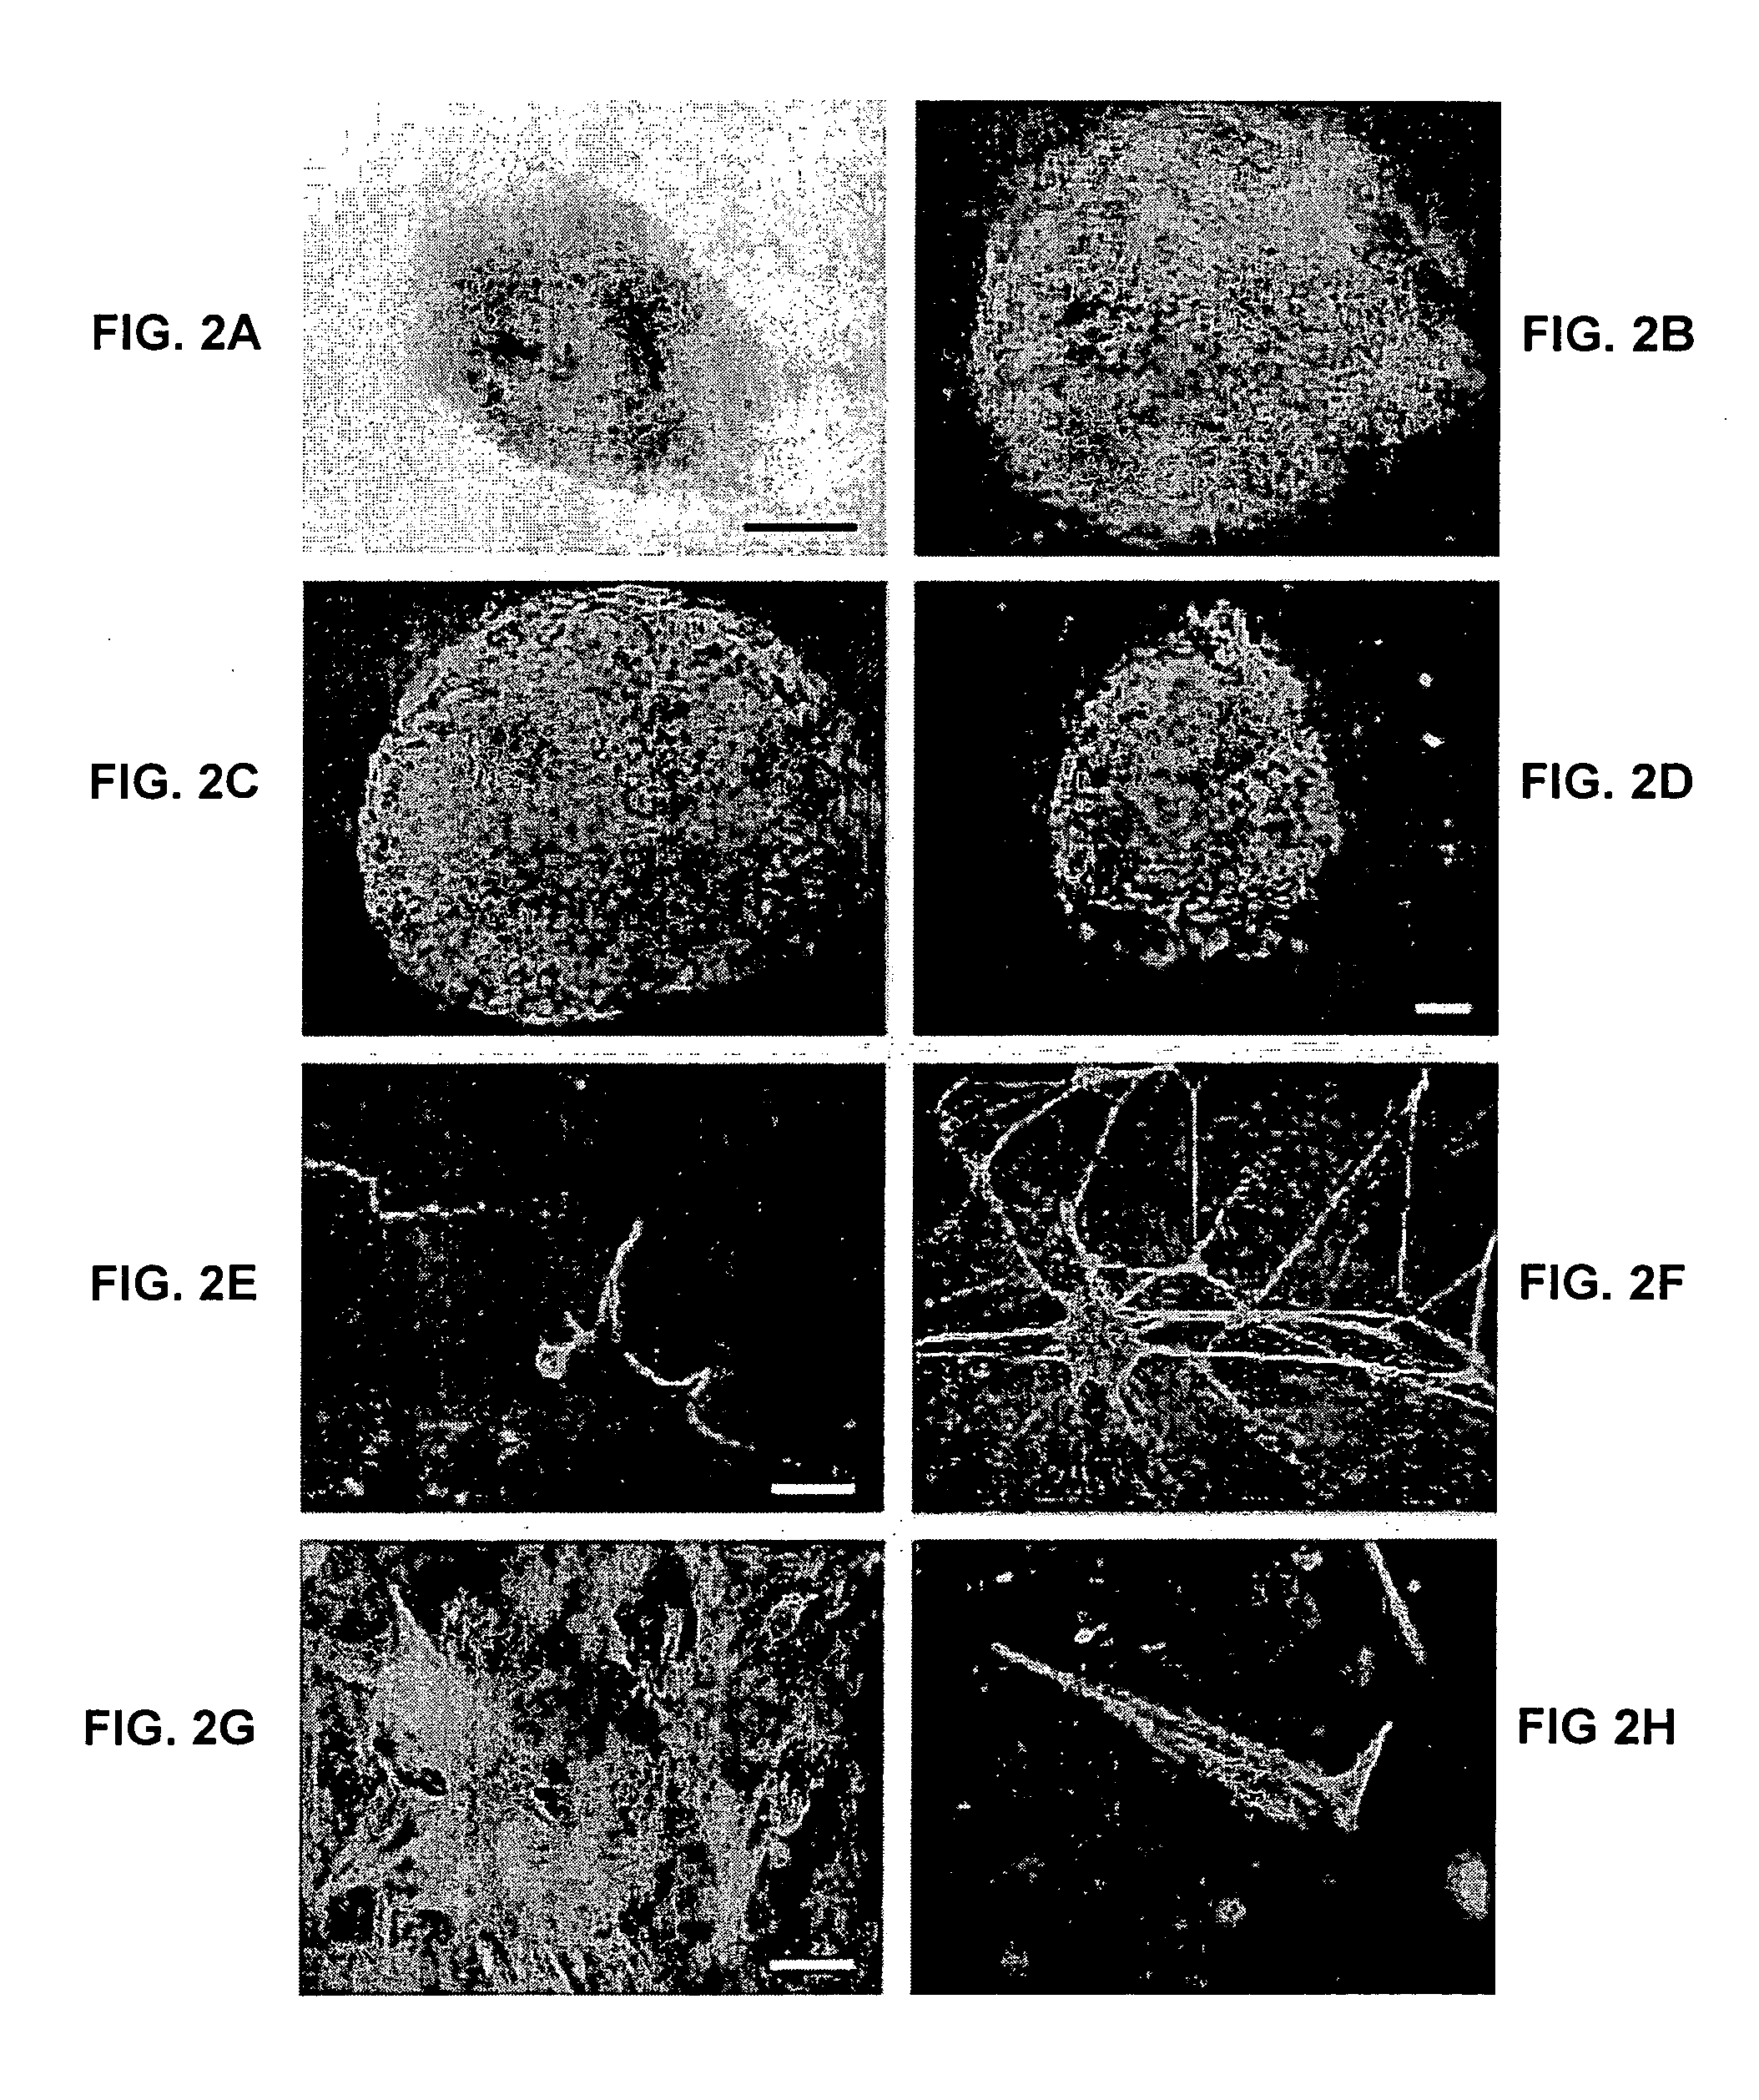 Embryonic stem cells and neural progenitor cells derived therefrom